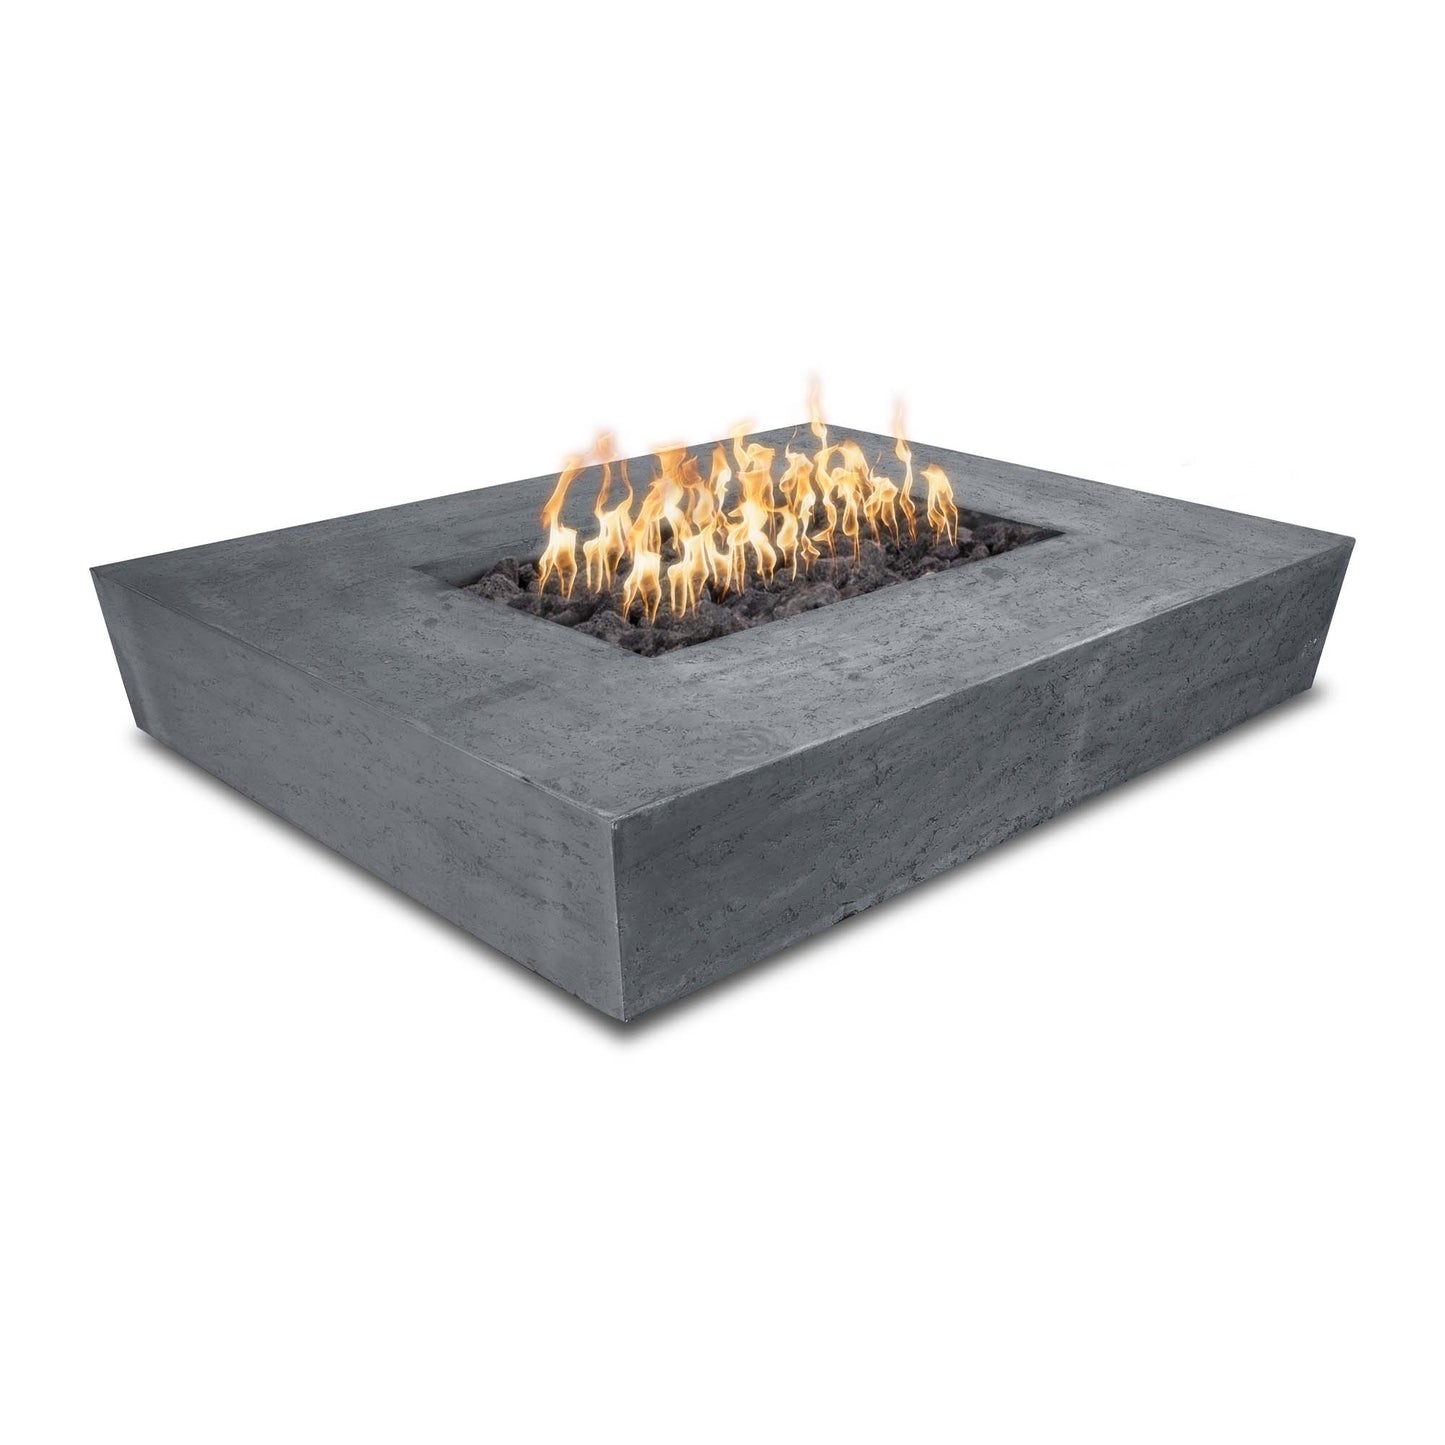 The Outdoor Plus Rectangular Heiko 58" Natural Gray GFRC Concrete Natural Gas Fire Pit with Flame Sense with Spark Ignition